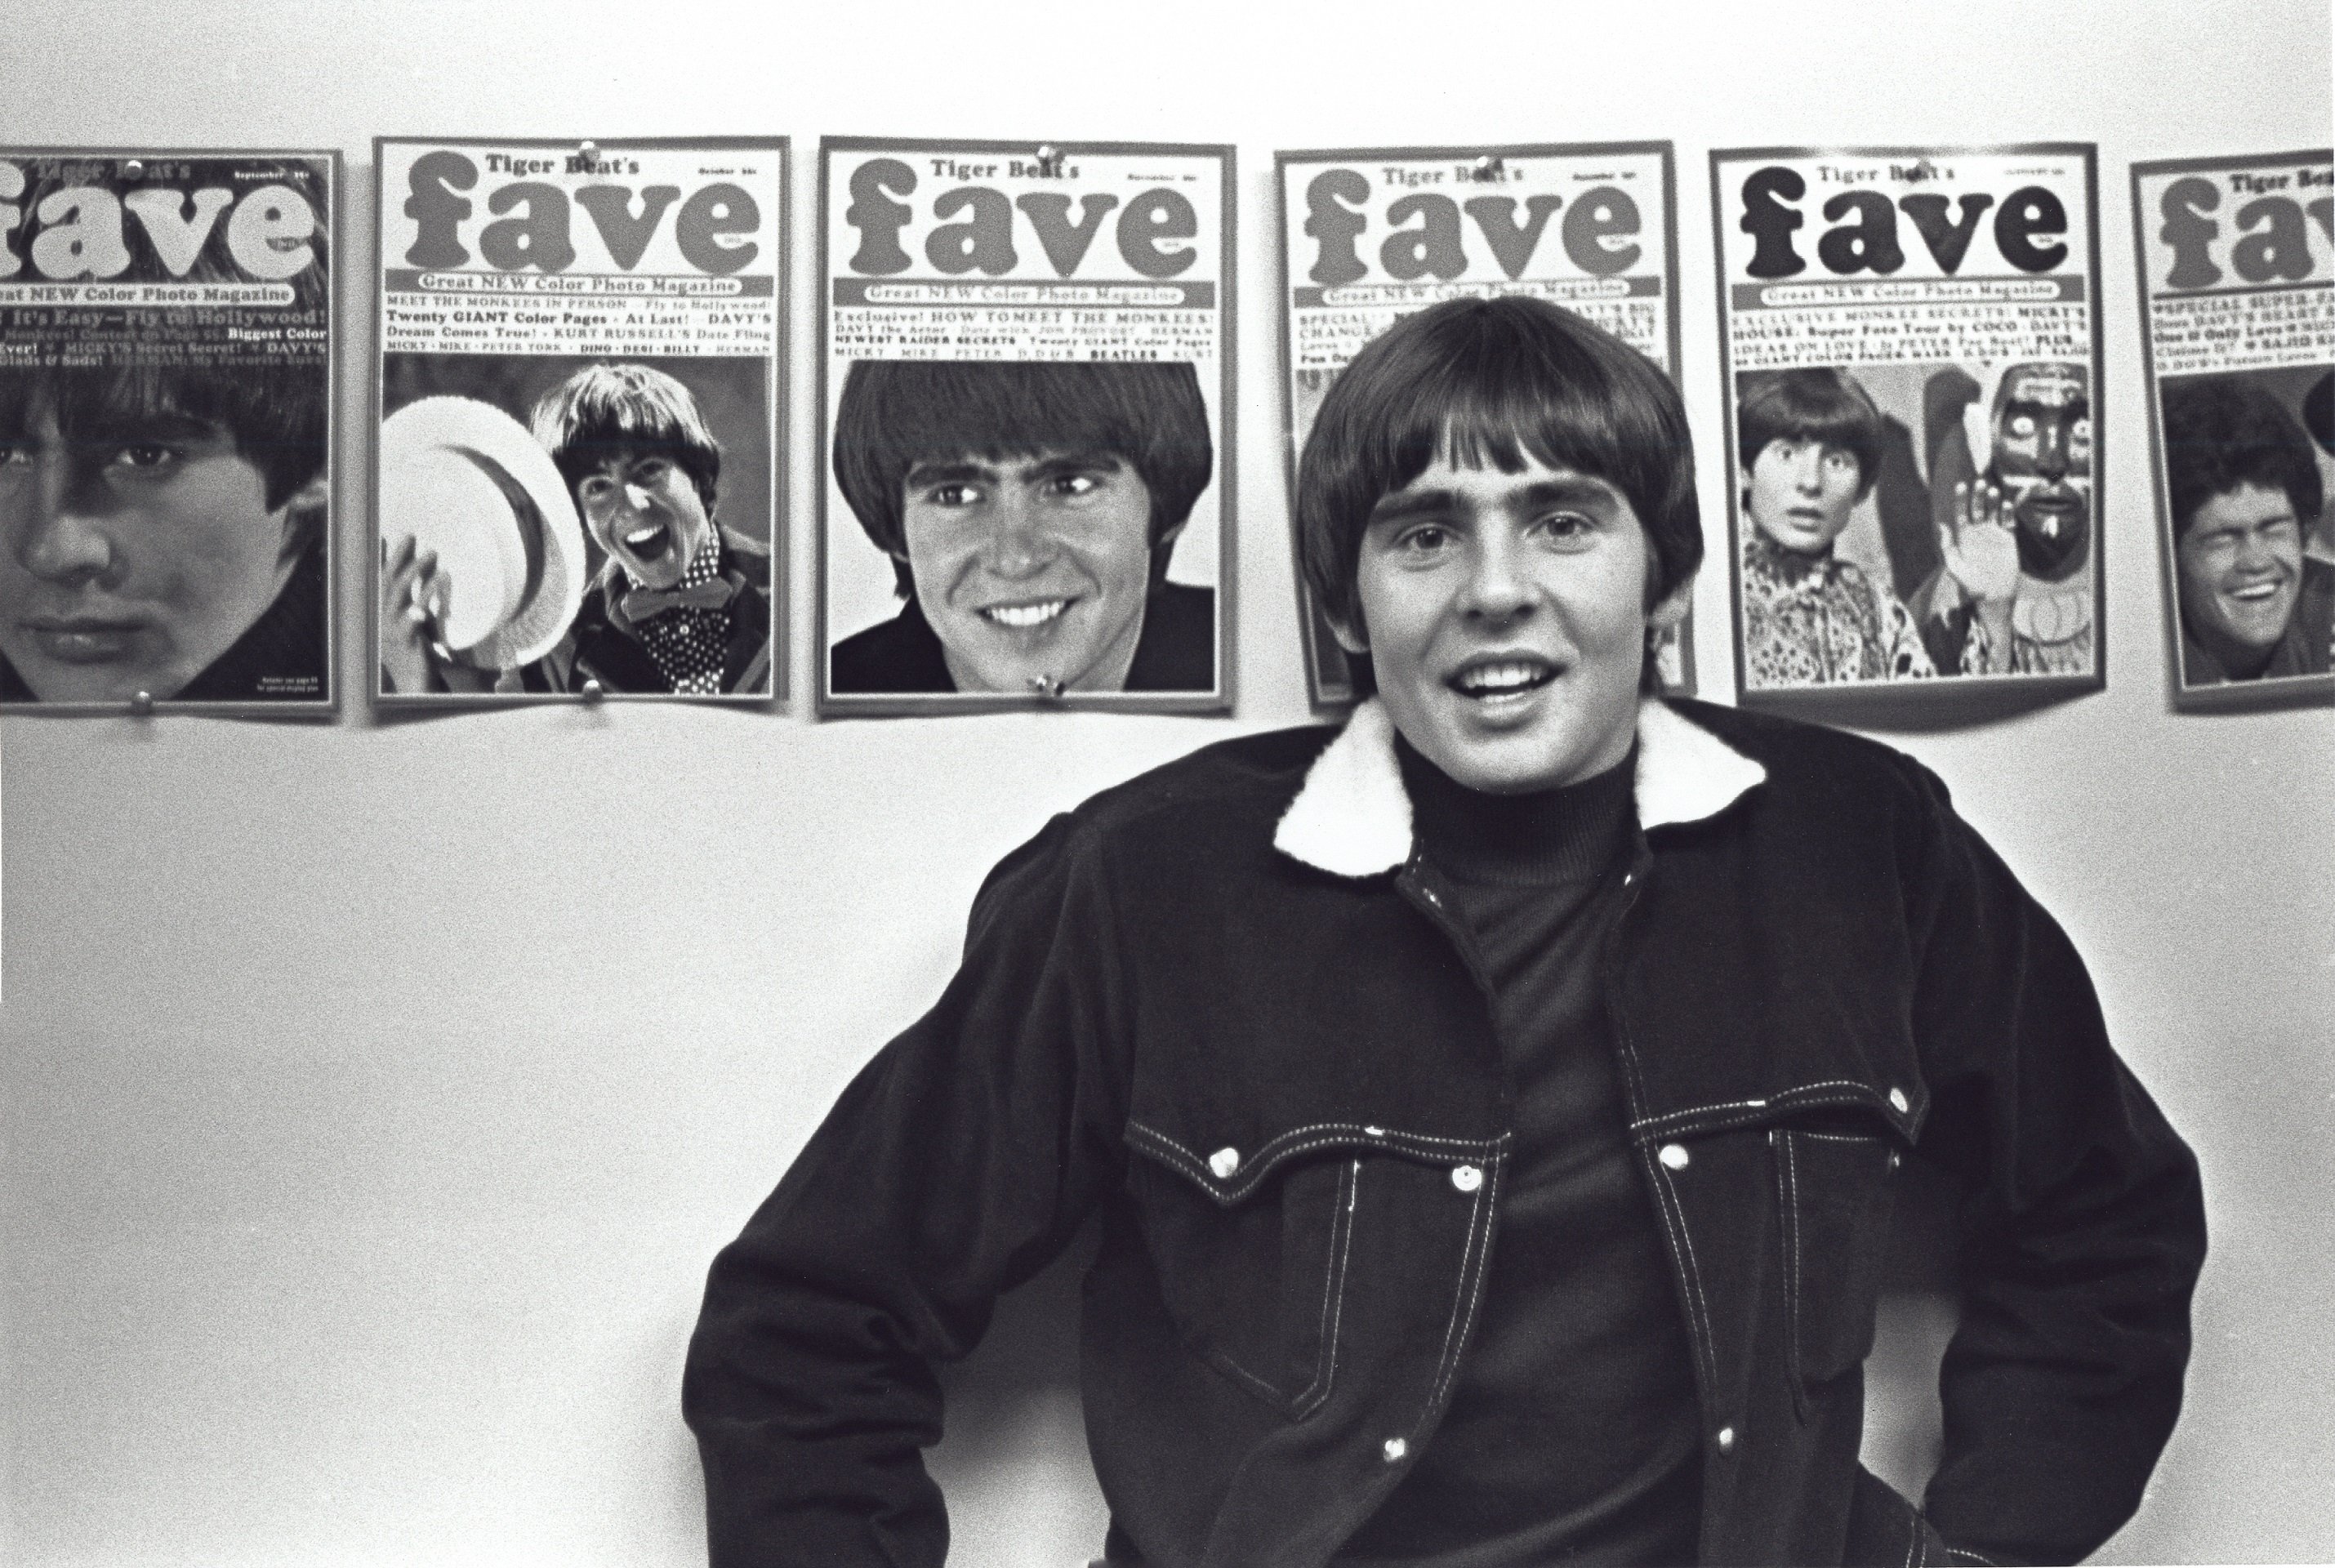 The Monkees' Davy Jones in front of posters